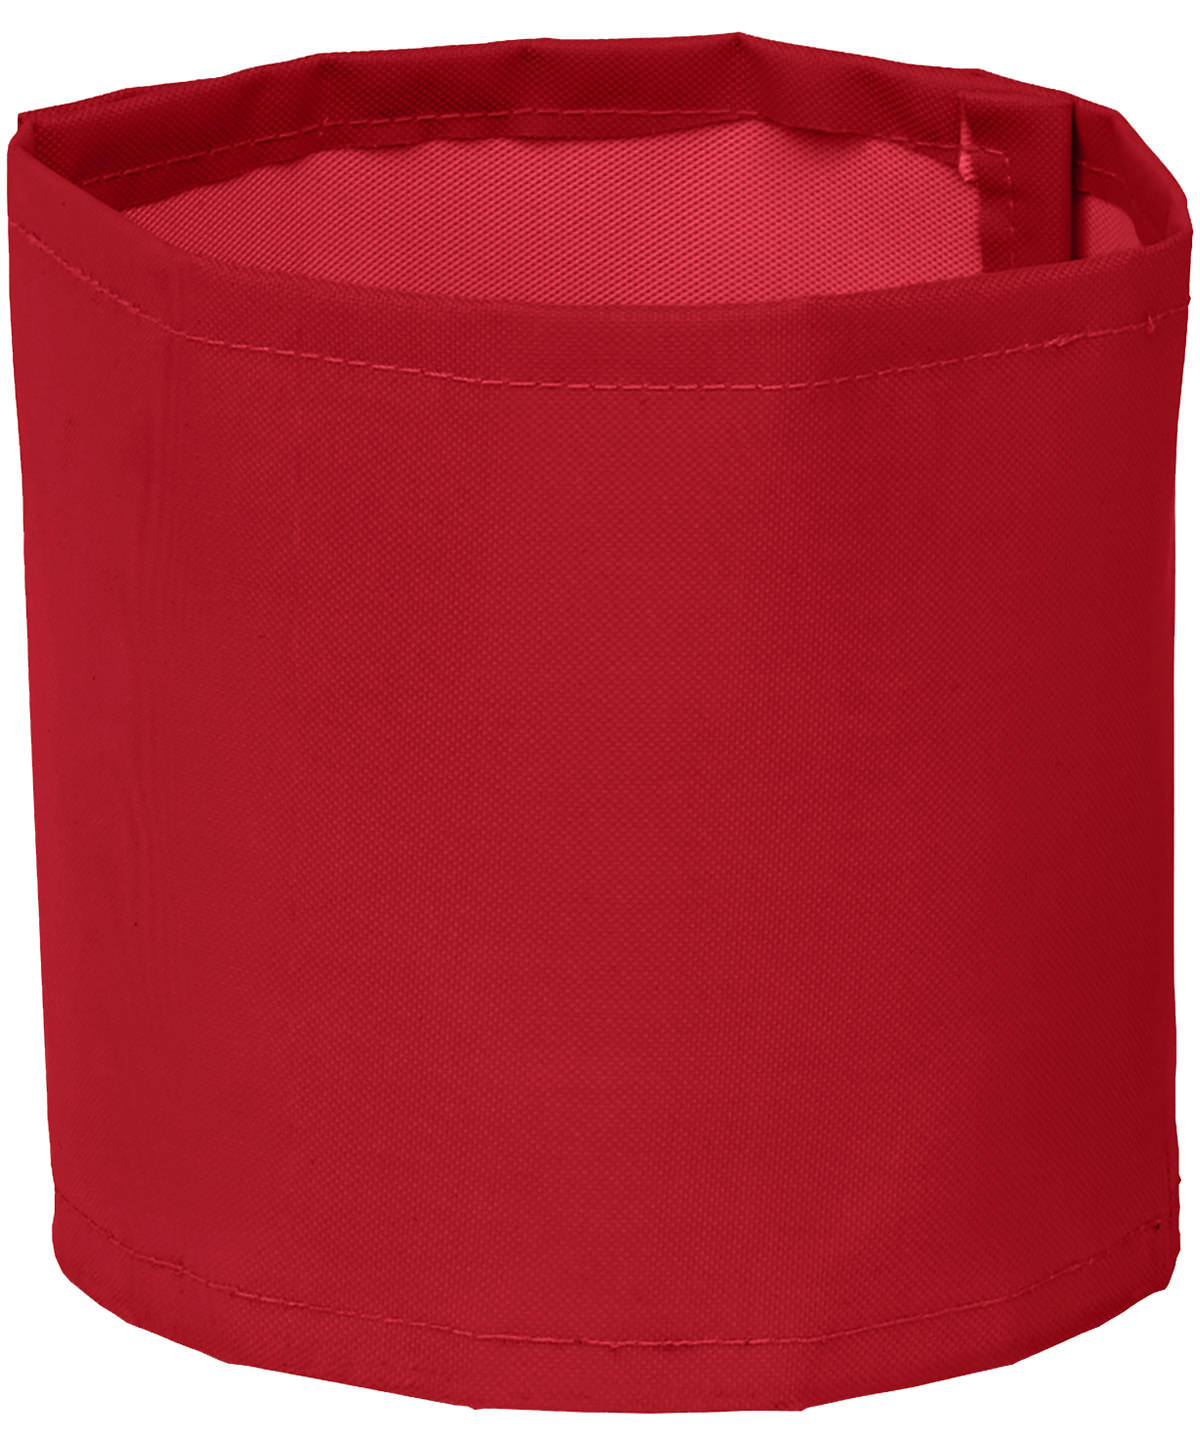 Print-Me Armbands (Hvw066) (Pack Of 20) Red Size Large/XL